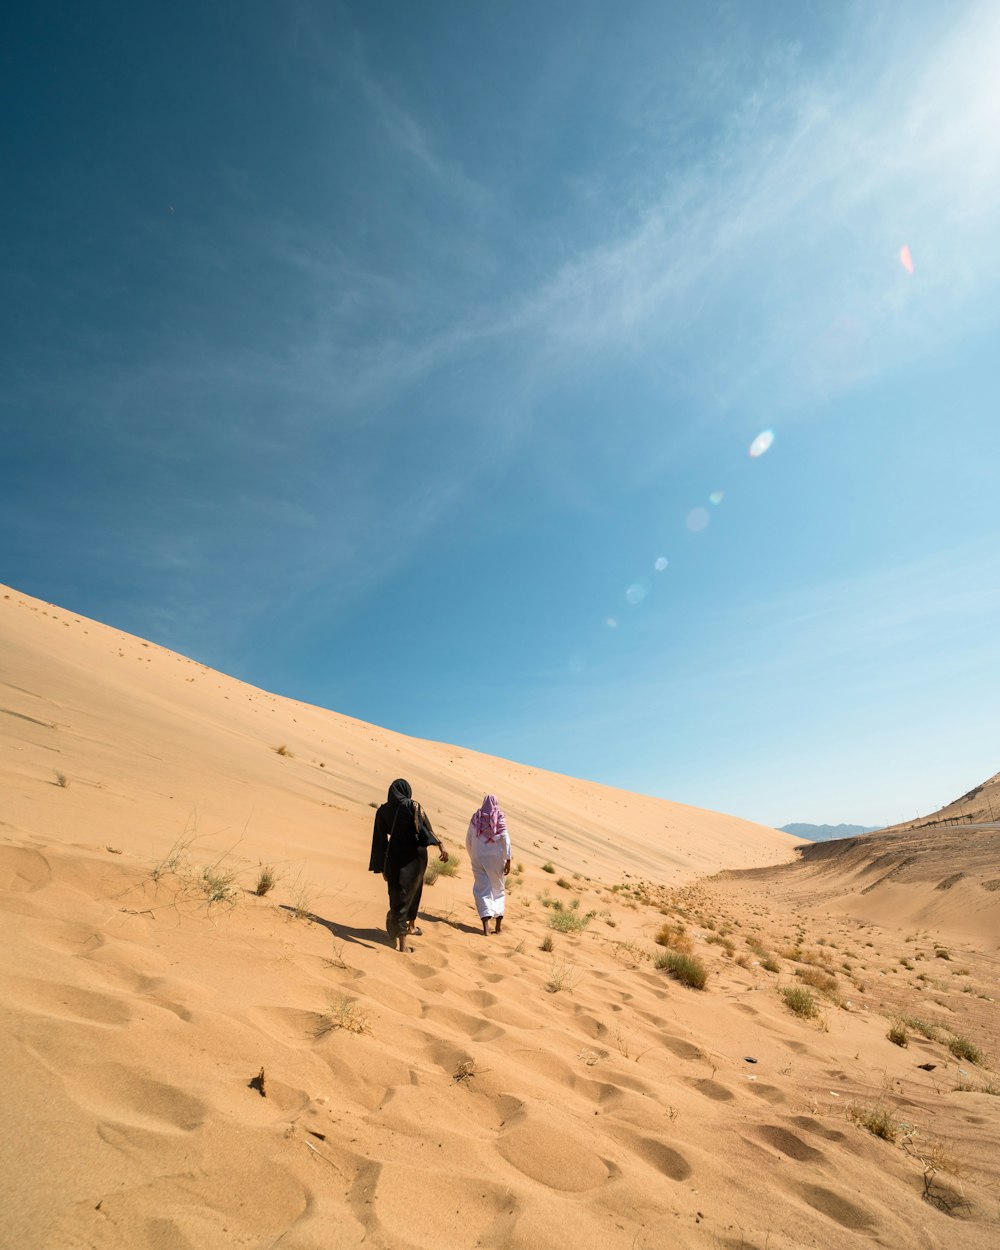 two people walking on desert under blue and white sky